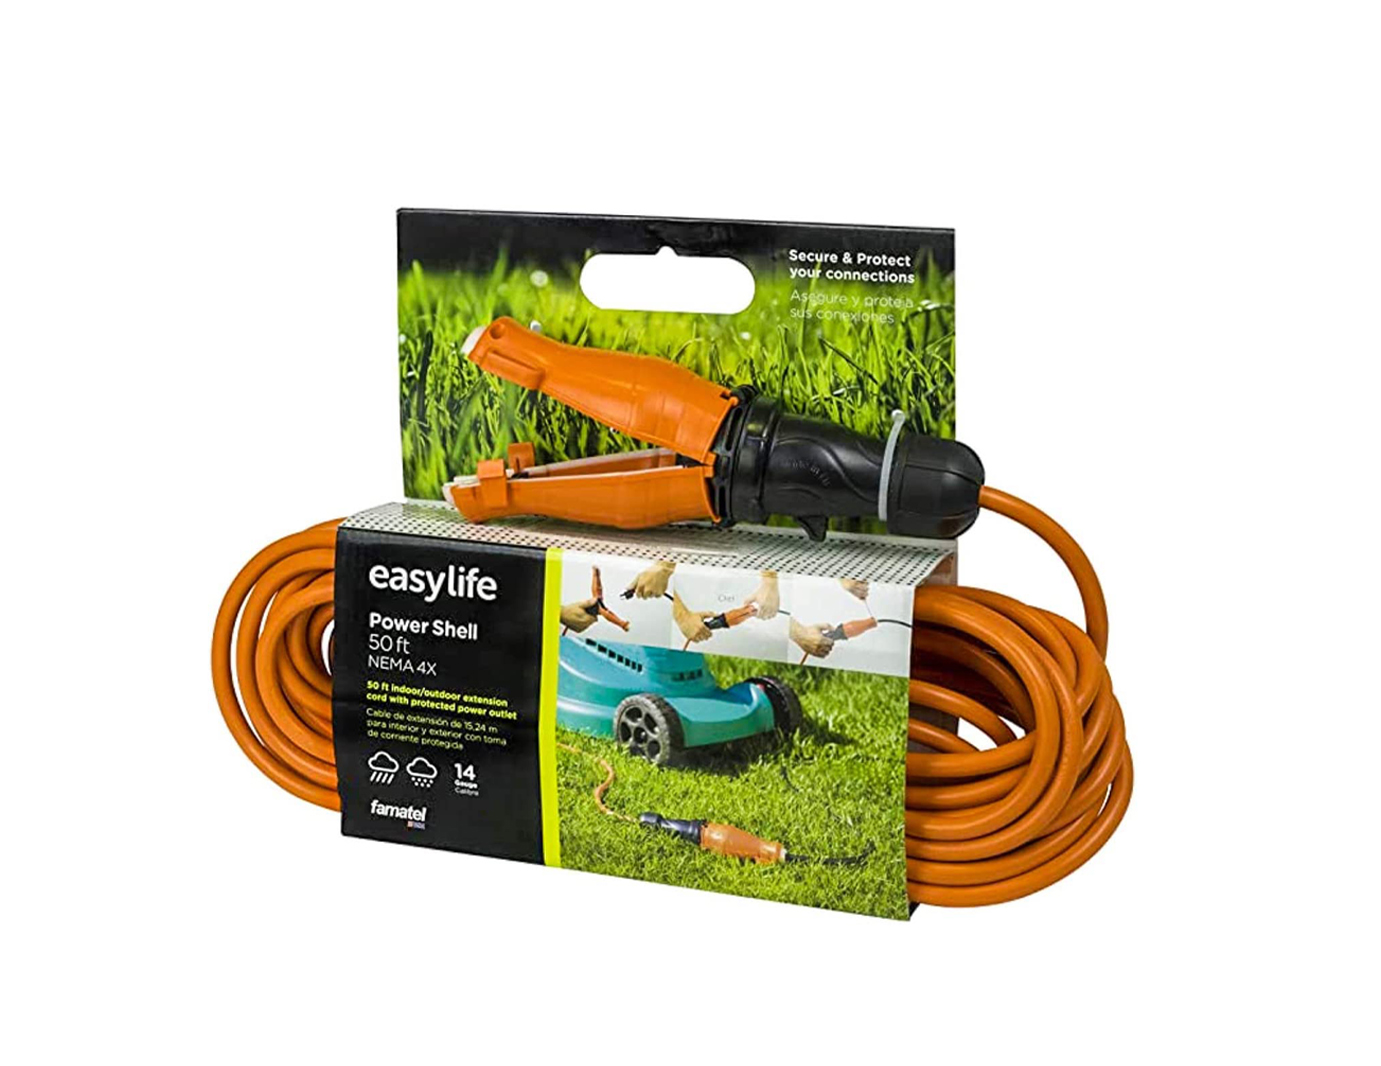 https://famatelusa.com/wp-content/uploads/2020/08/50-ft-Power-Shell-Extension-Cord-Safety-Seal-Easylife-Tech.jpg